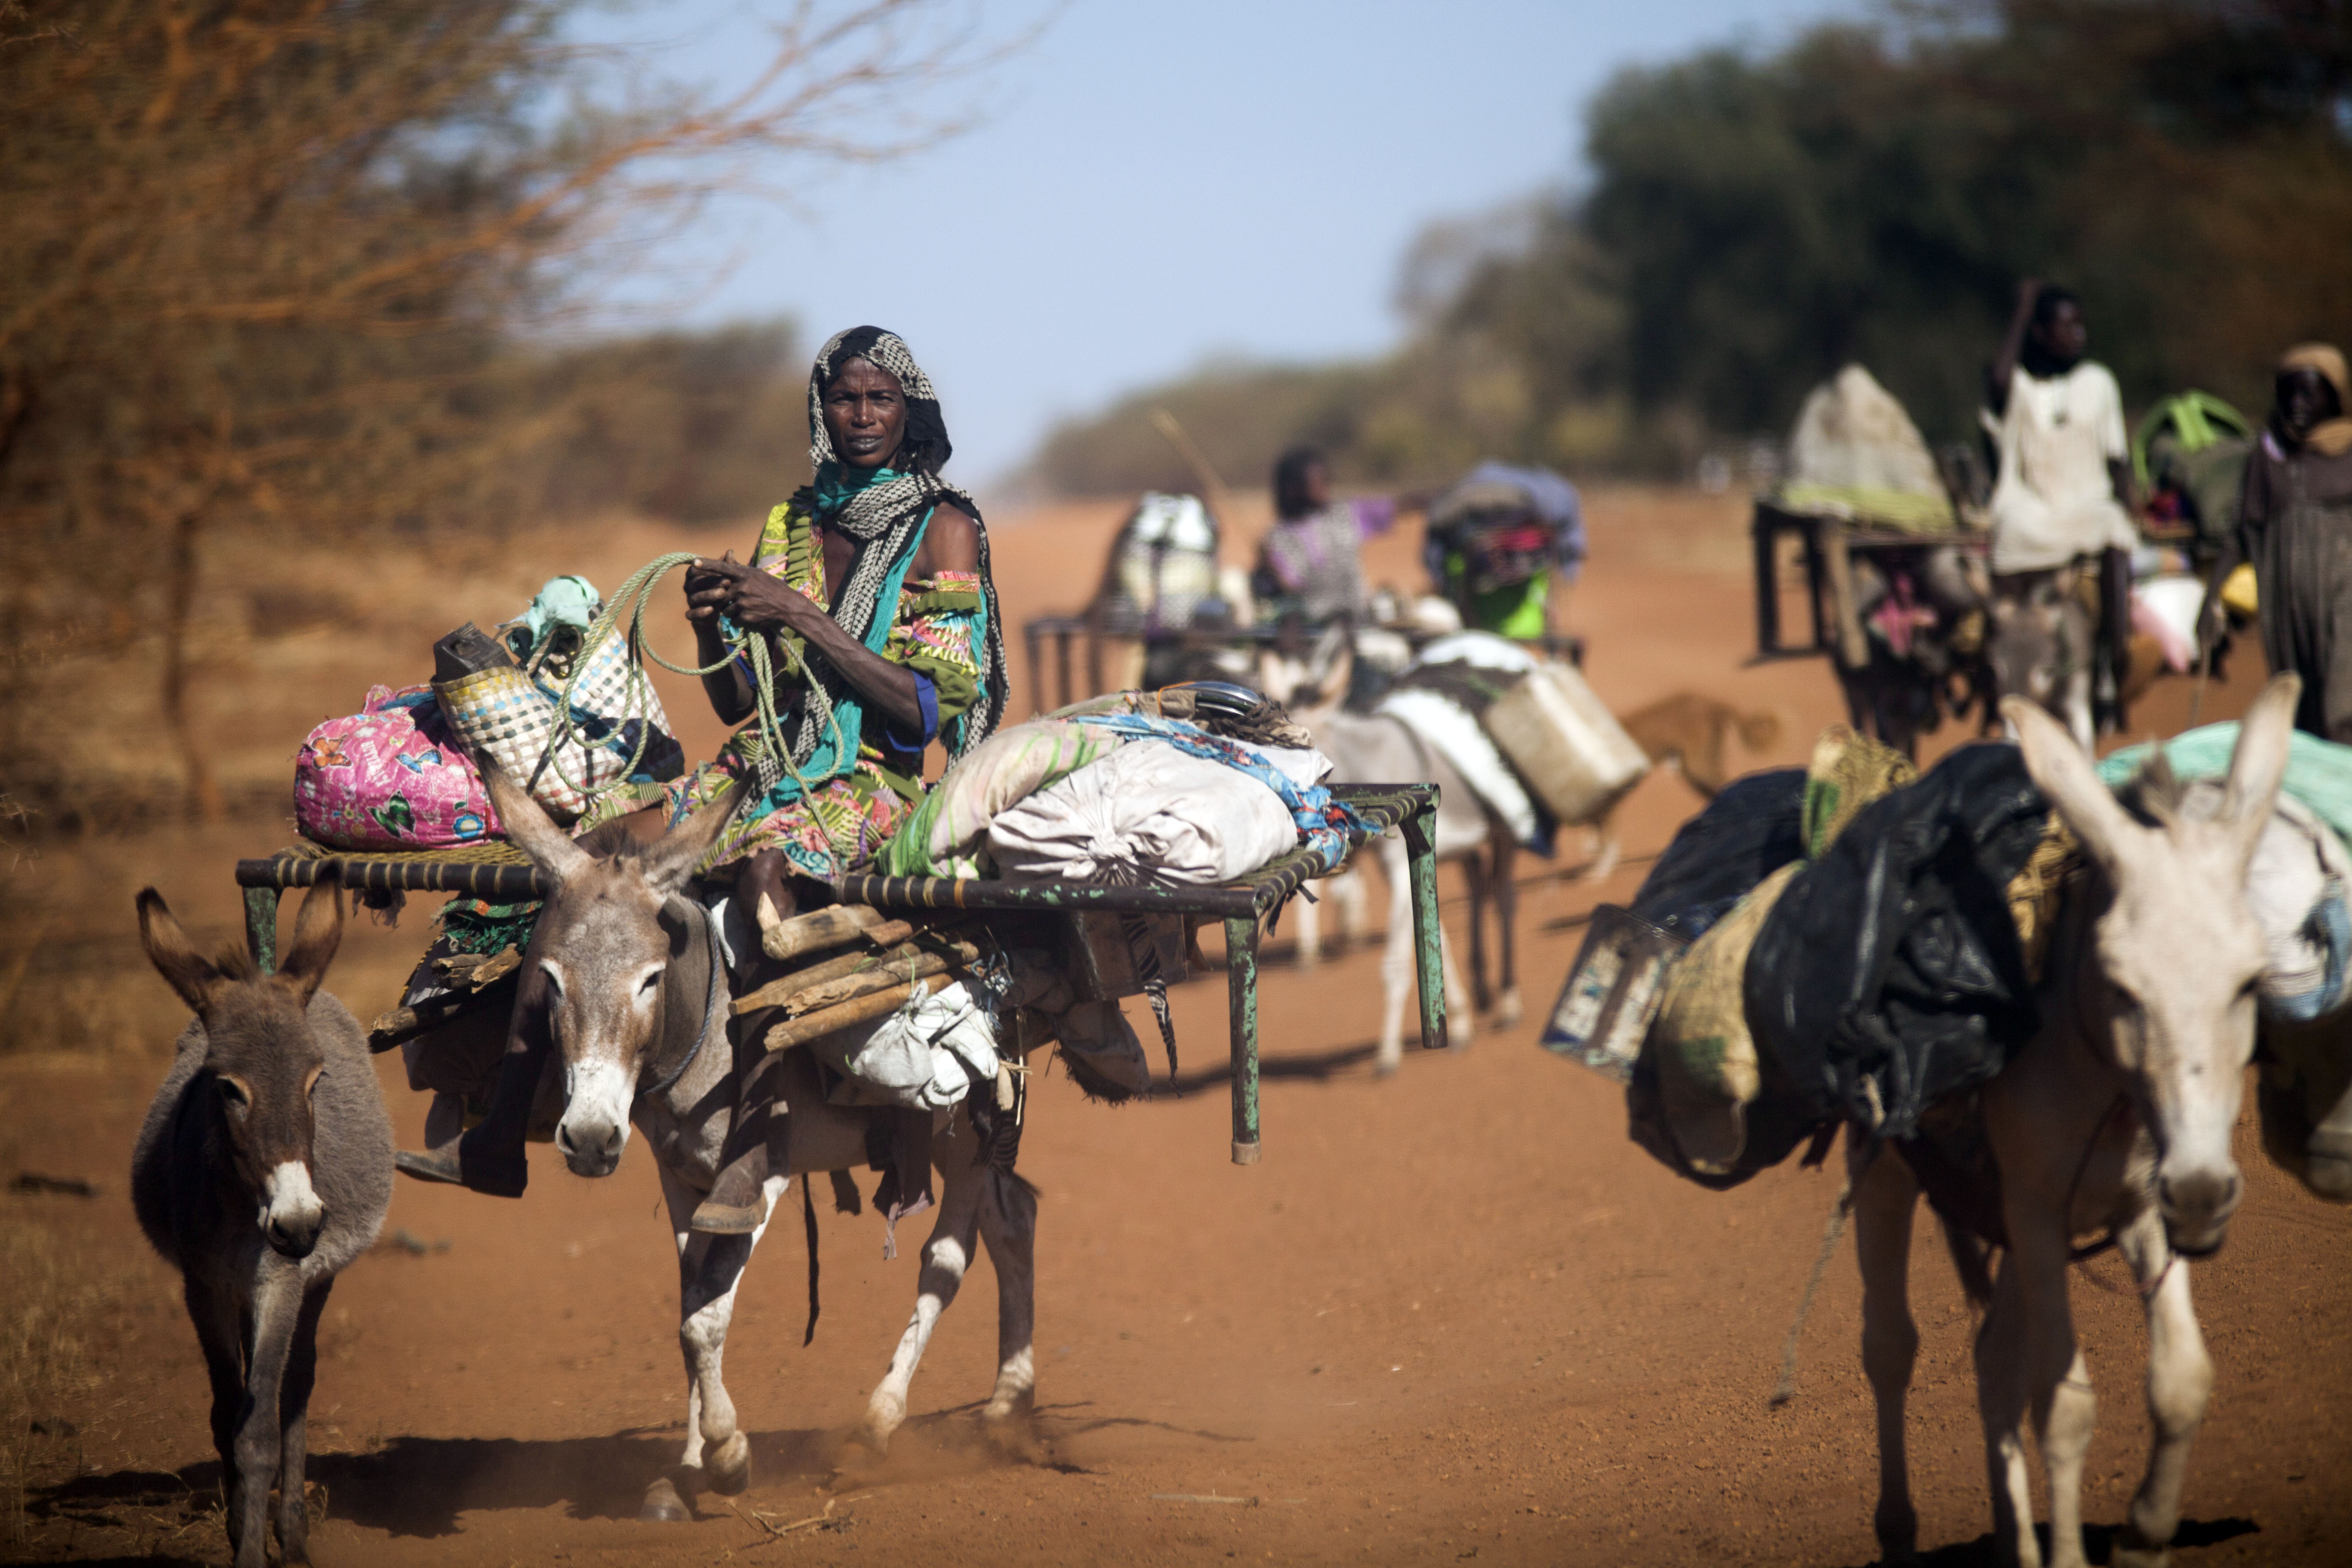 (FILES) A woman rides a donkey as nomad families from the Misseryia area in Abyei region migrate from north on December 18, 2016.  The beginning of the dry season make this community move to the south, mostly populated by the Dinka tribe. The Abyei Administrative Area is a disputed territory between Sudan and South Sudan with a longstanding intercommunal tensions between the Ngok-Dinka ethnic majority and the pastoral Misseriya population, who migrate through the area seasonally from the north. / AFP PHOTO / Albert Gonzalez Farran